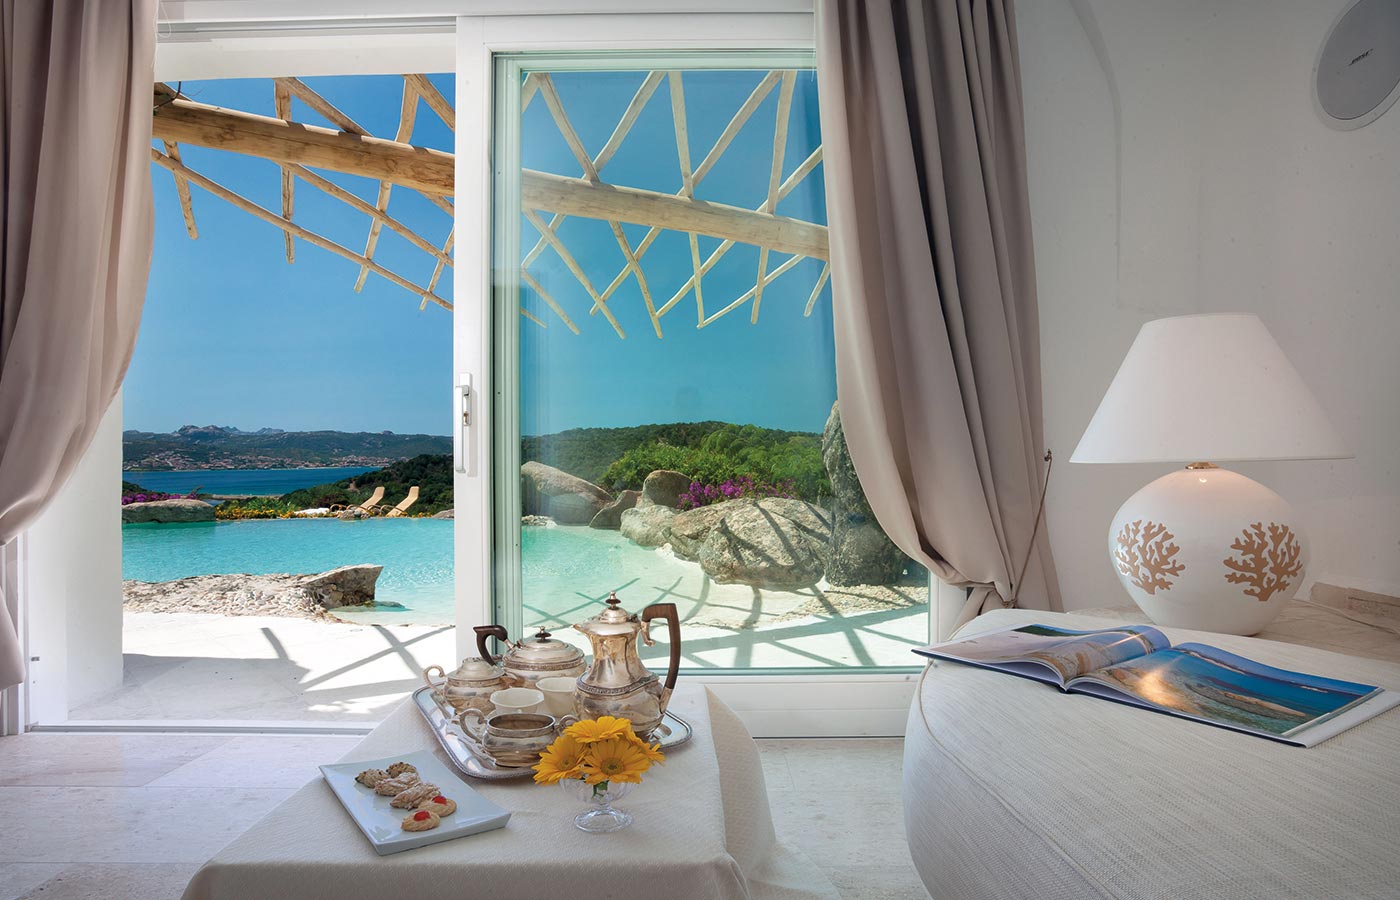 Luxury hotel in Costa Smeralda with private pool